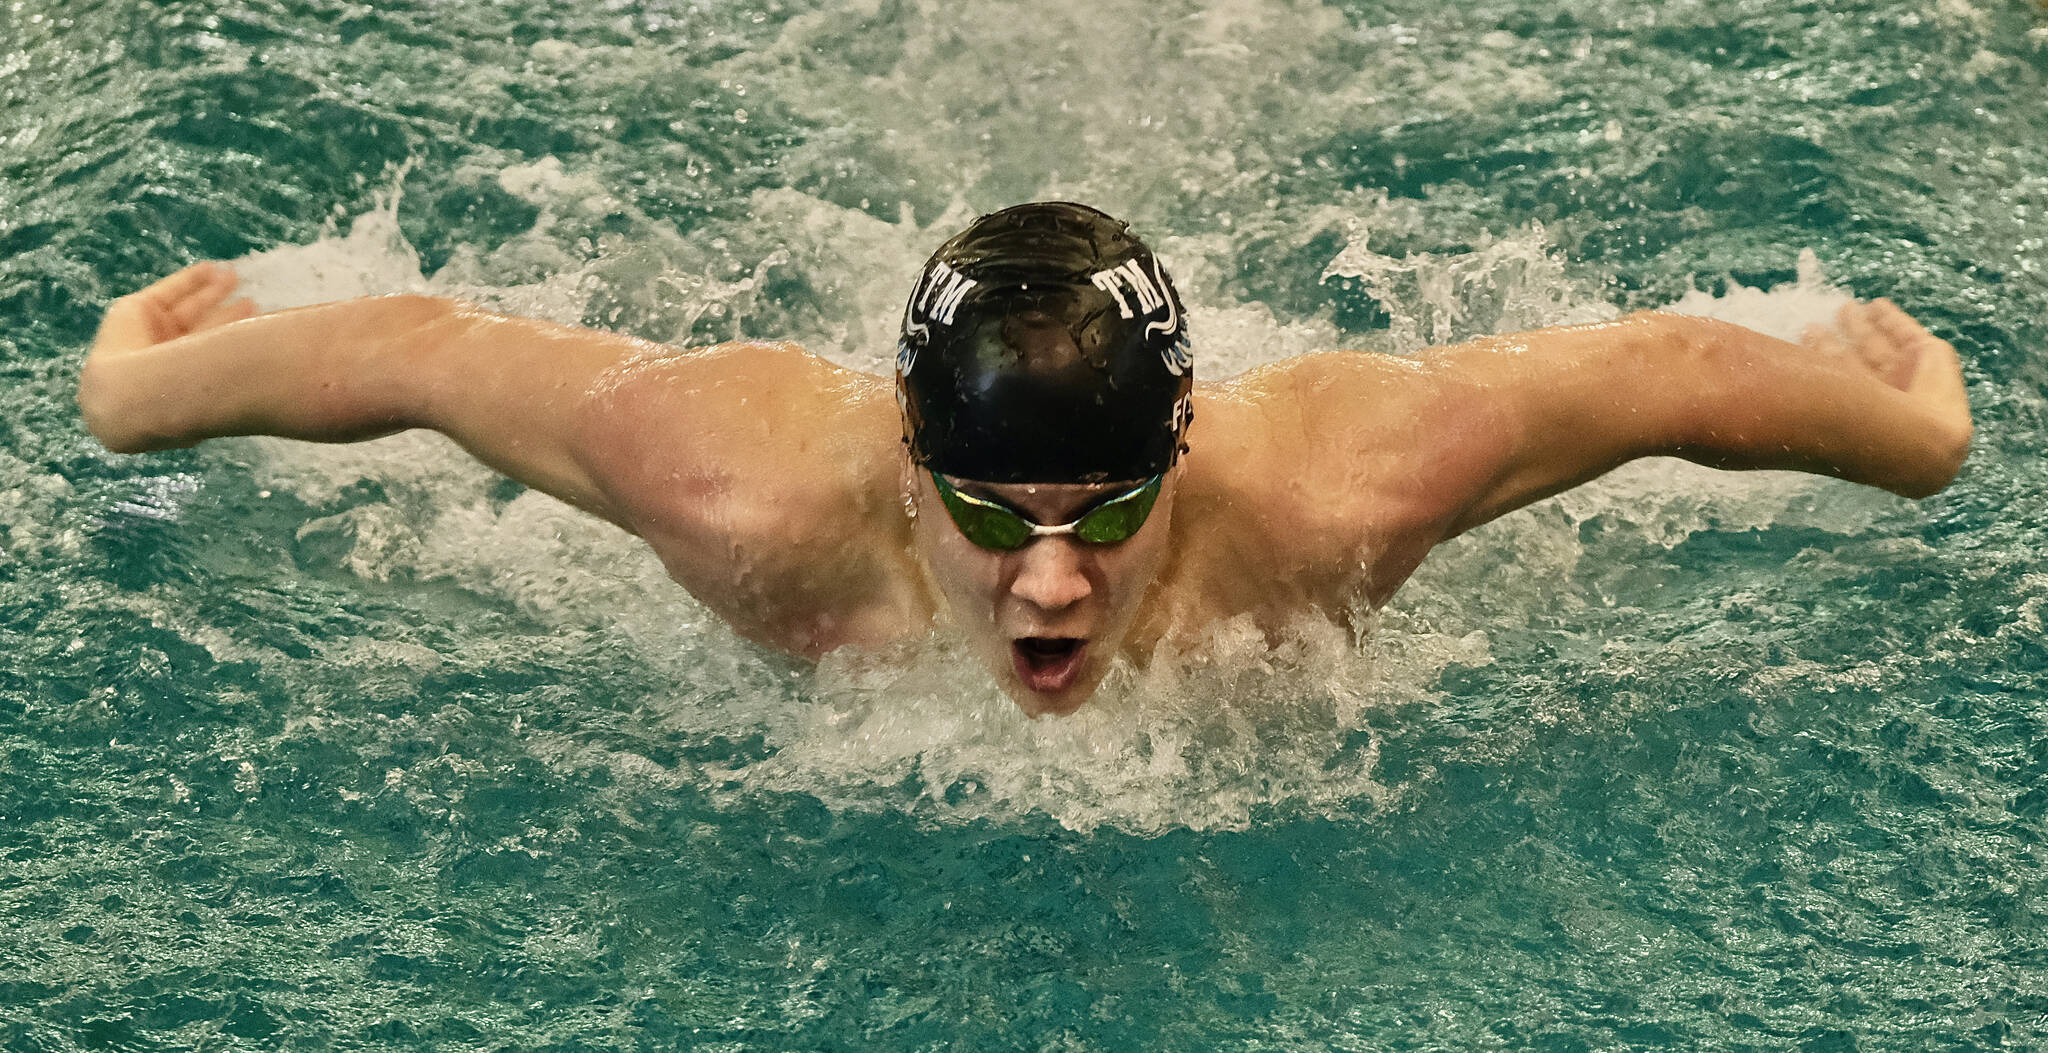 Juneau’s PJ Foy, shown winning the 2023 100 yard butterfly in 48.27 for Thunder Mountain High School during the ASAA state championships at the Dimond Park Aquatics Center on Nov. 4, 2023, qualified for the 2024 June Olympic Team Trials by swimming a 100 long course meters butterfly in a personal best 53.44 on March 16, 2024, at the Speedo Sectionals in Federal Way, Washington. (Klas Stolpe for the Juneau Empire)